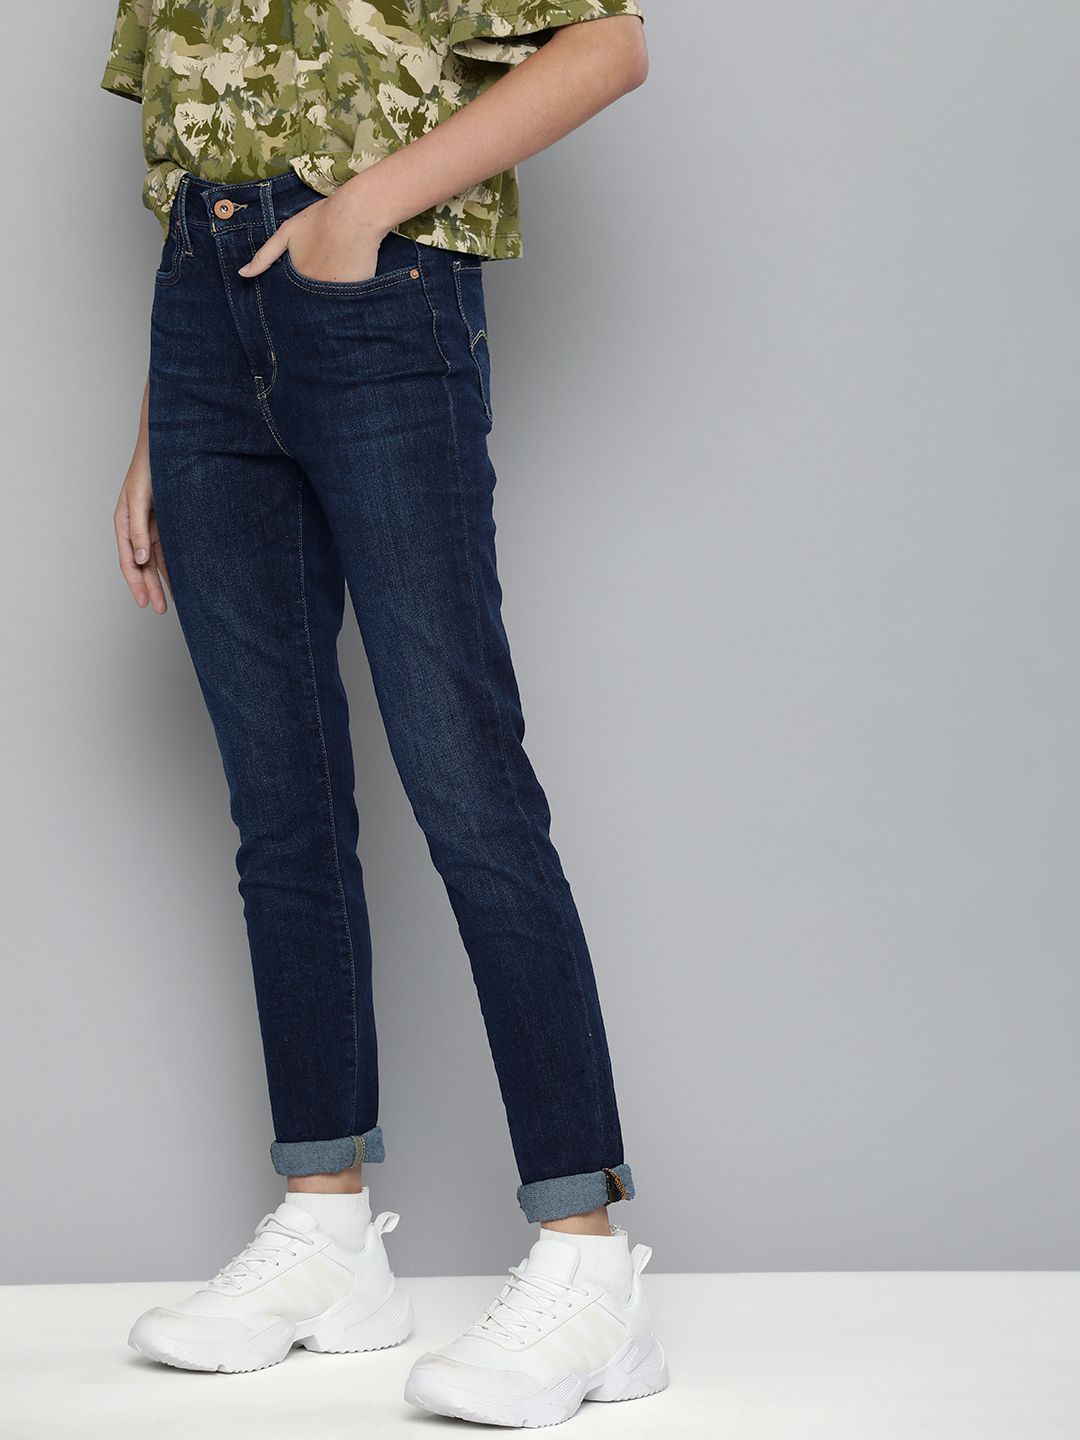 Levis Women Navy Blue Skinny Fit Light Fade Stretchable Casual Jeans Price in India